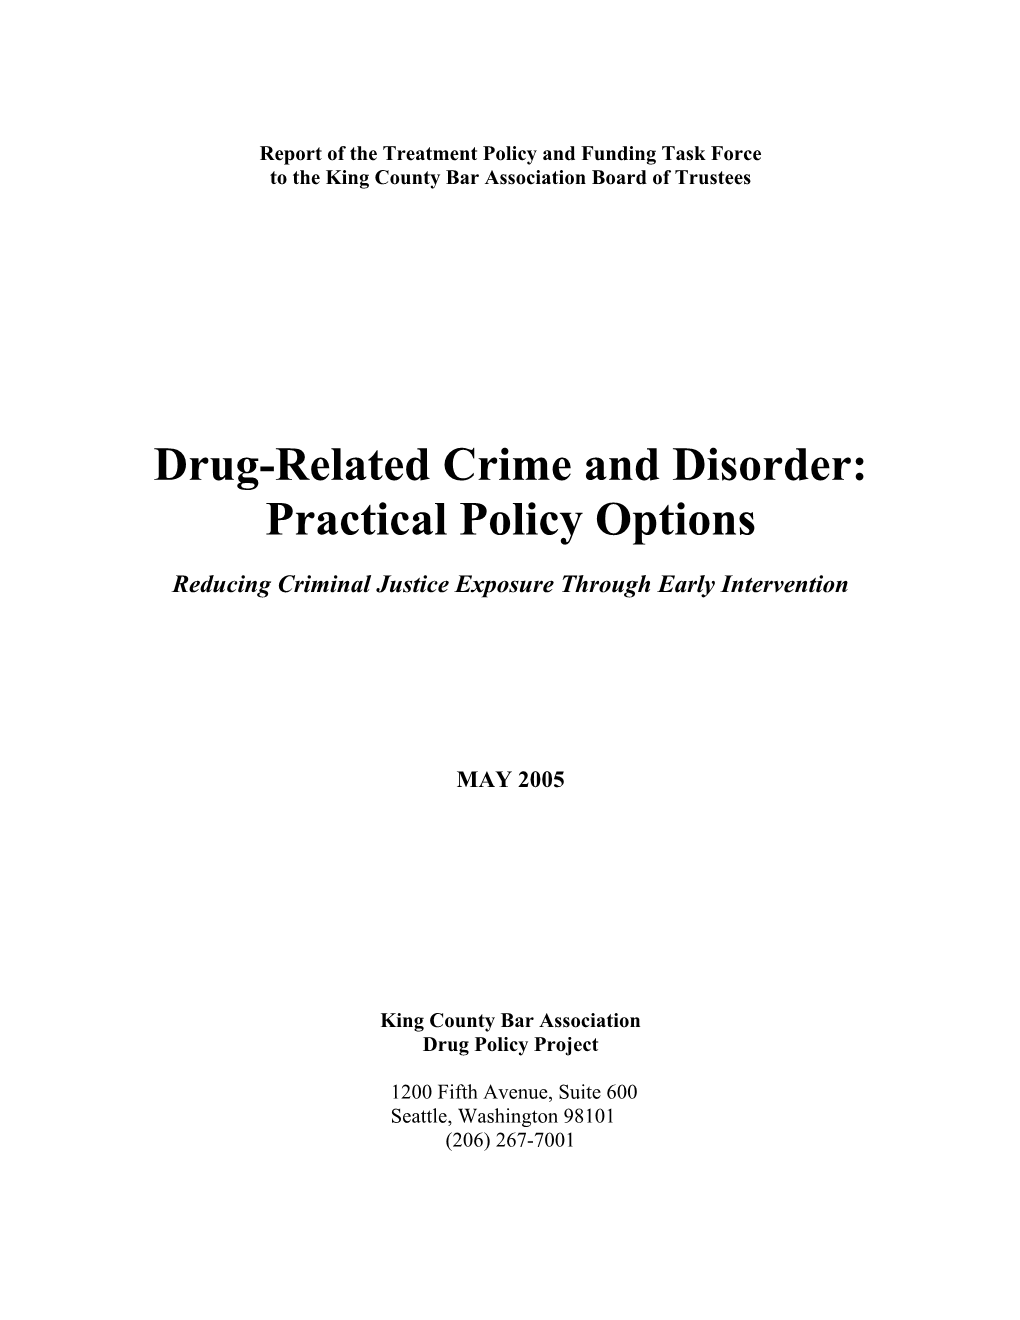 Drug-Related Crime and Disorder: Practical Policy Options